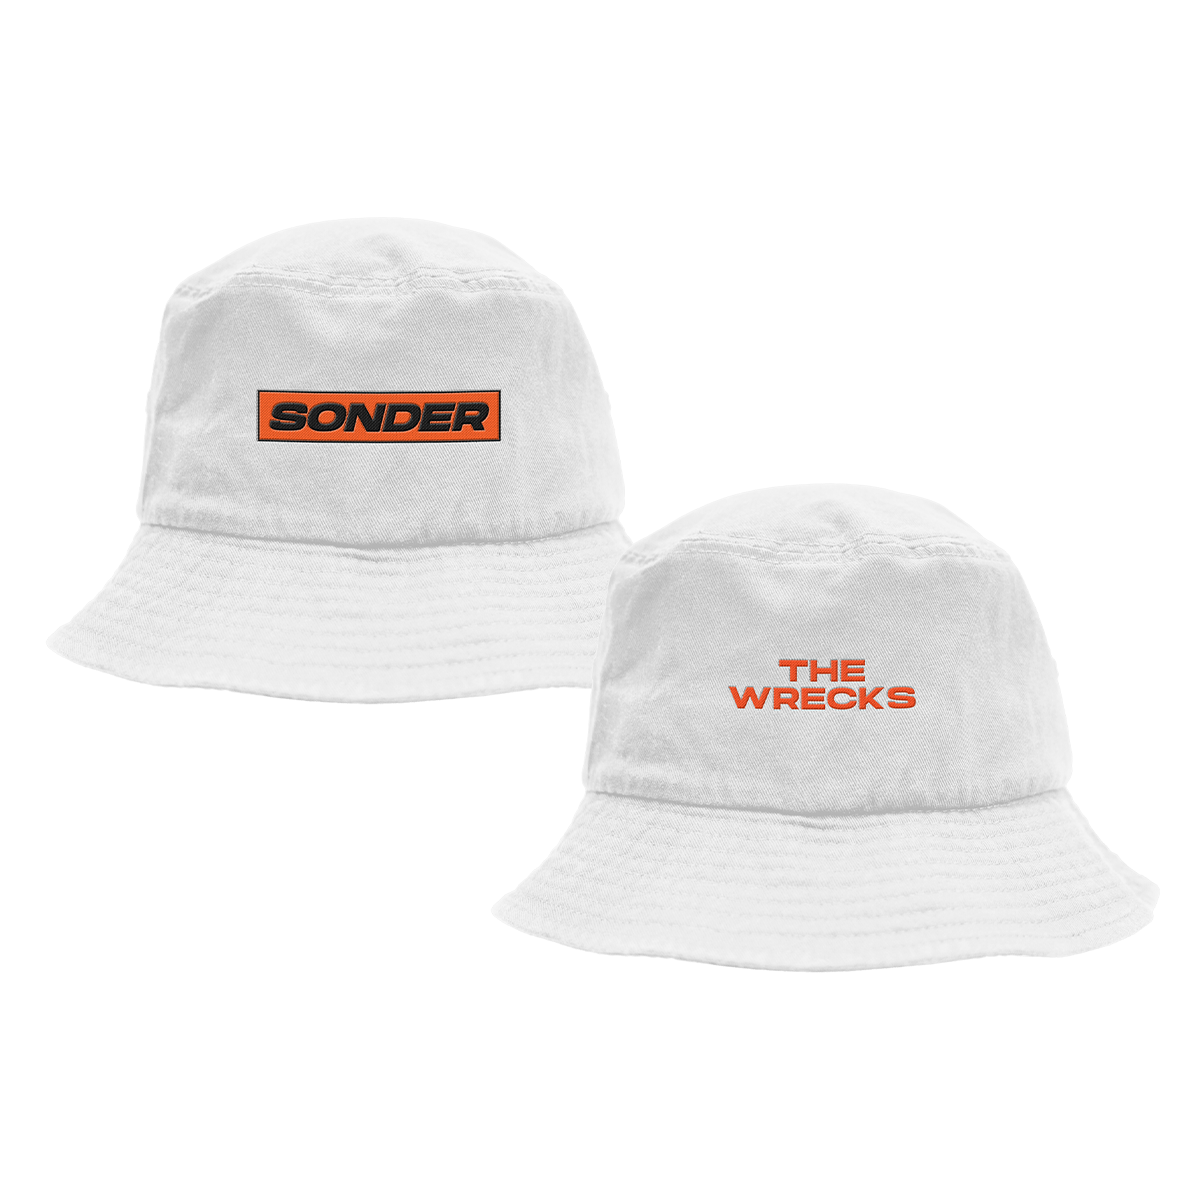 The Wrecks Sonder Bucket Hat - White front and back